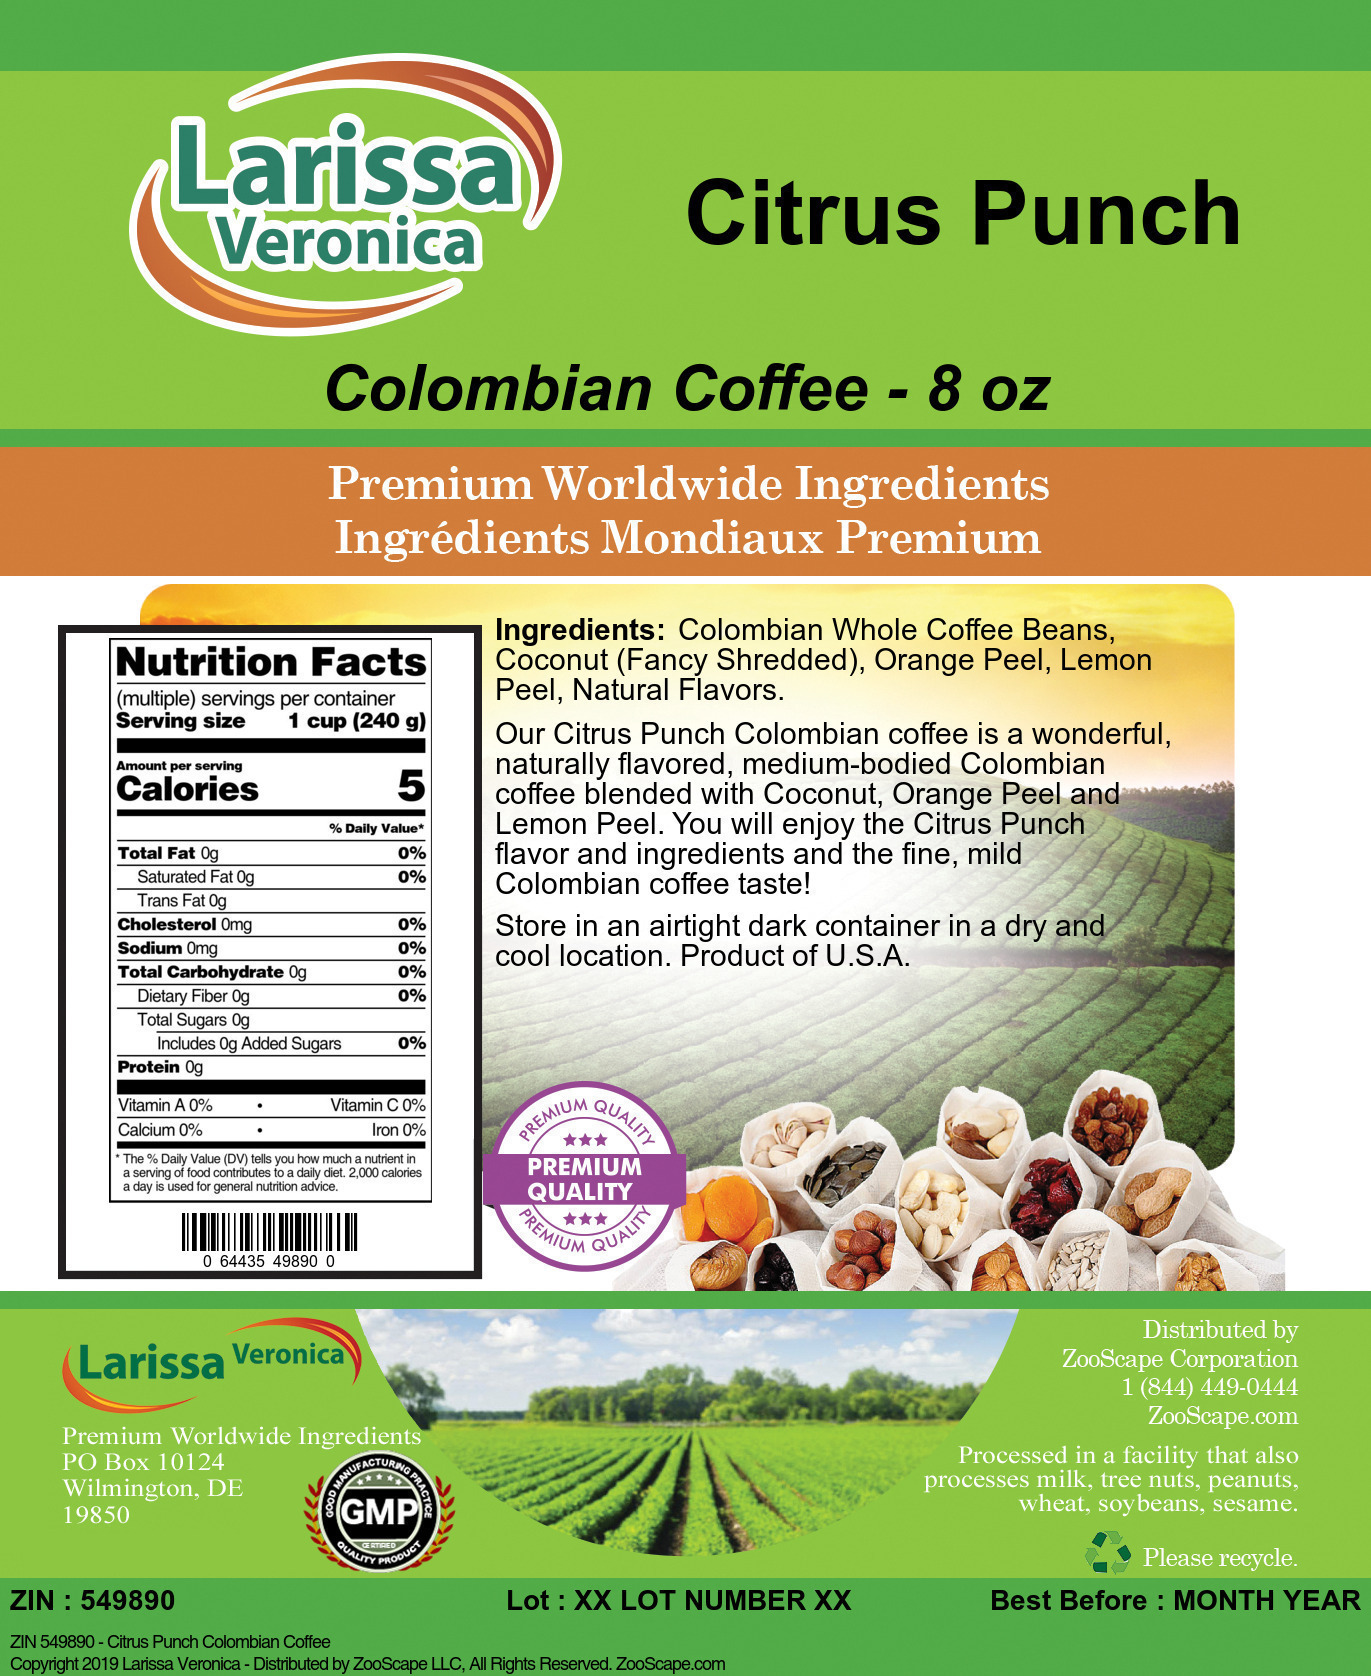 Citrus Punch Colombian Coffee - Label